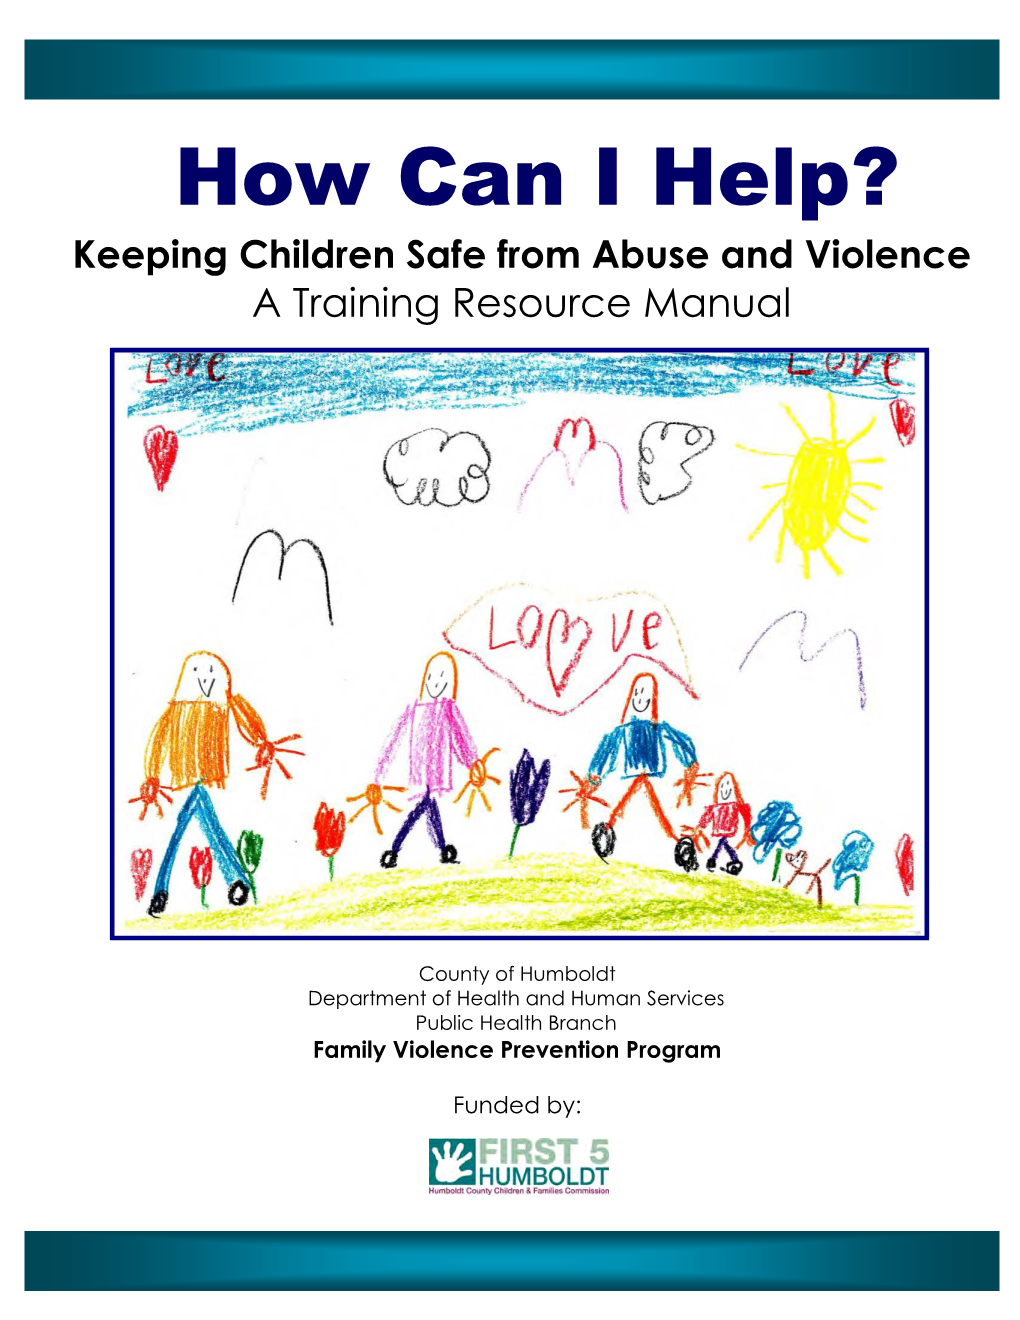 How Can I Help? Keeping Children Safe from Abuse and Violence a Training Resource Manual